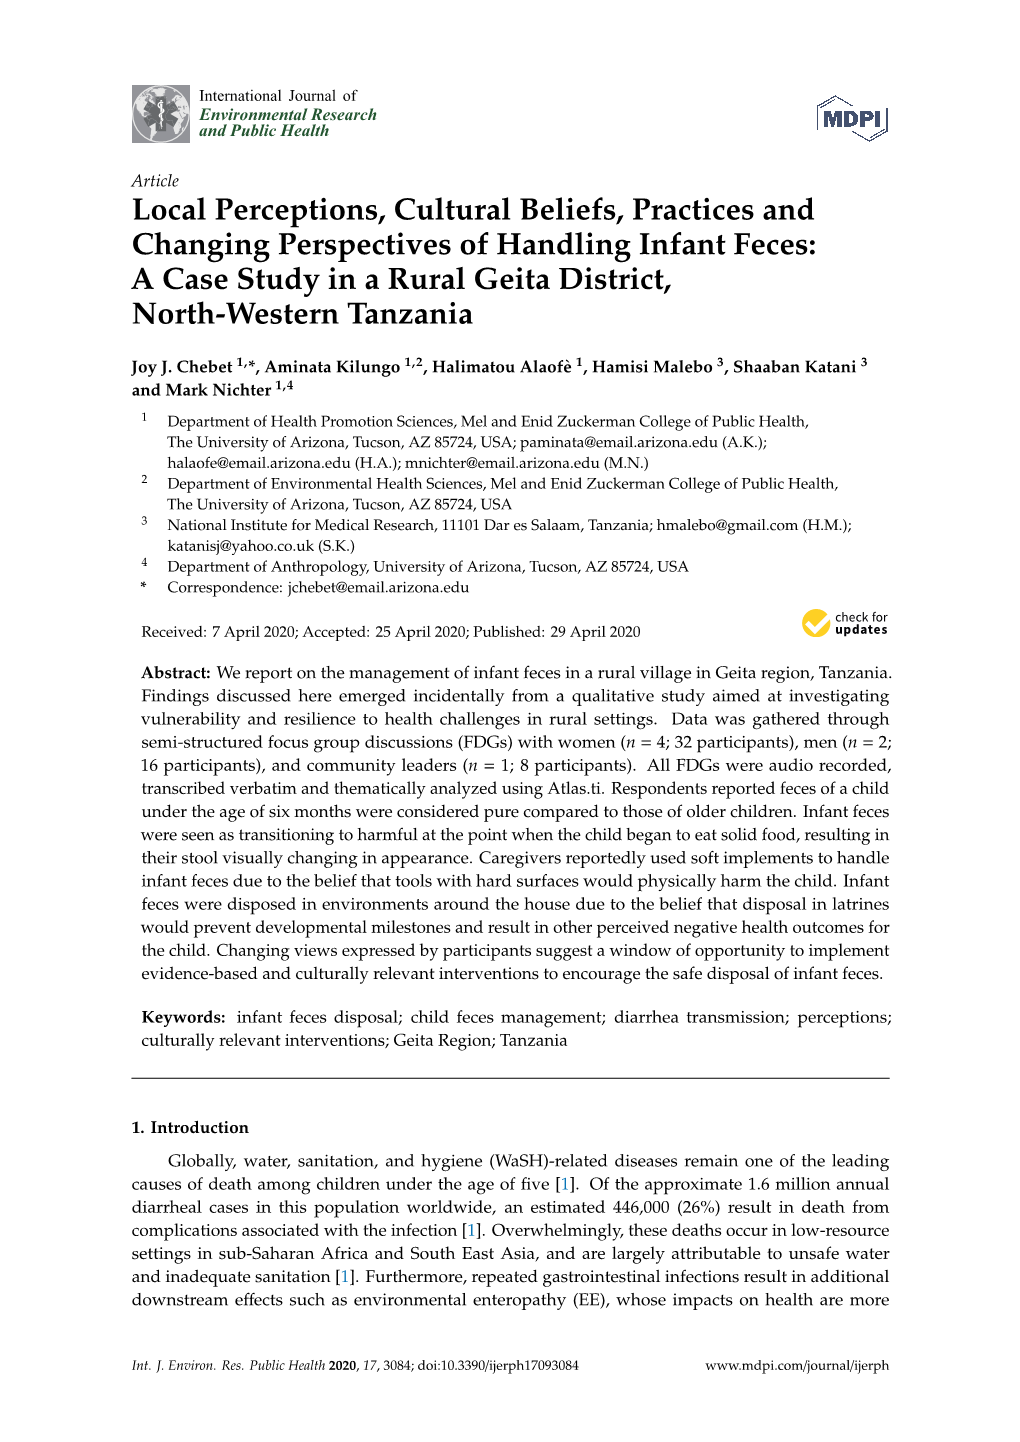 Local Perceptions, Cultural Beliefs, Practices and Changing Perspectives of Handling Infant Feces: a Case Study in a Rural Geita District, North-Western Tanzania